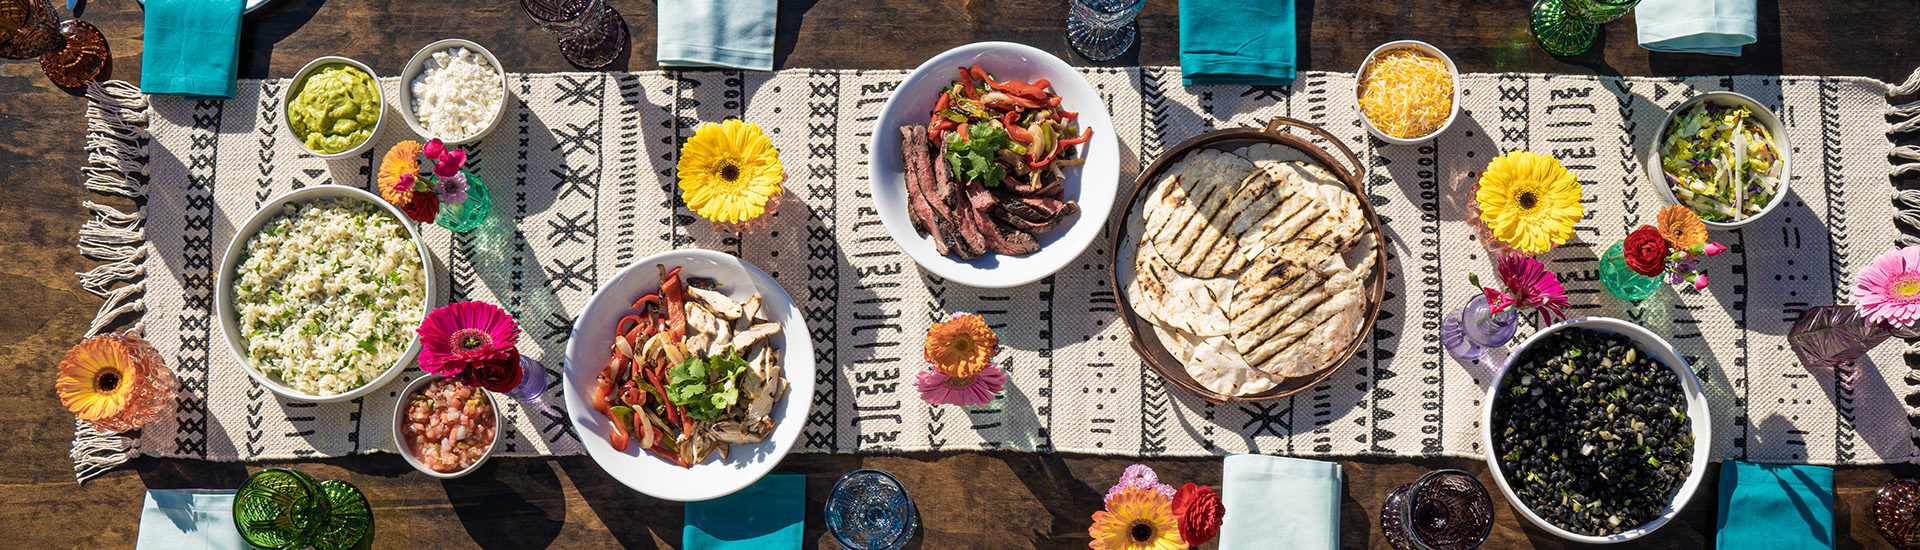 Overhead of different dishes for a fajita fiesta in white bowls. Underneath is a patterned black and light tan runner with fringe on the bottom. The table is decorated with colorful chalice classes, vibrant flowers in clear glasses and different shades of blue napkins.